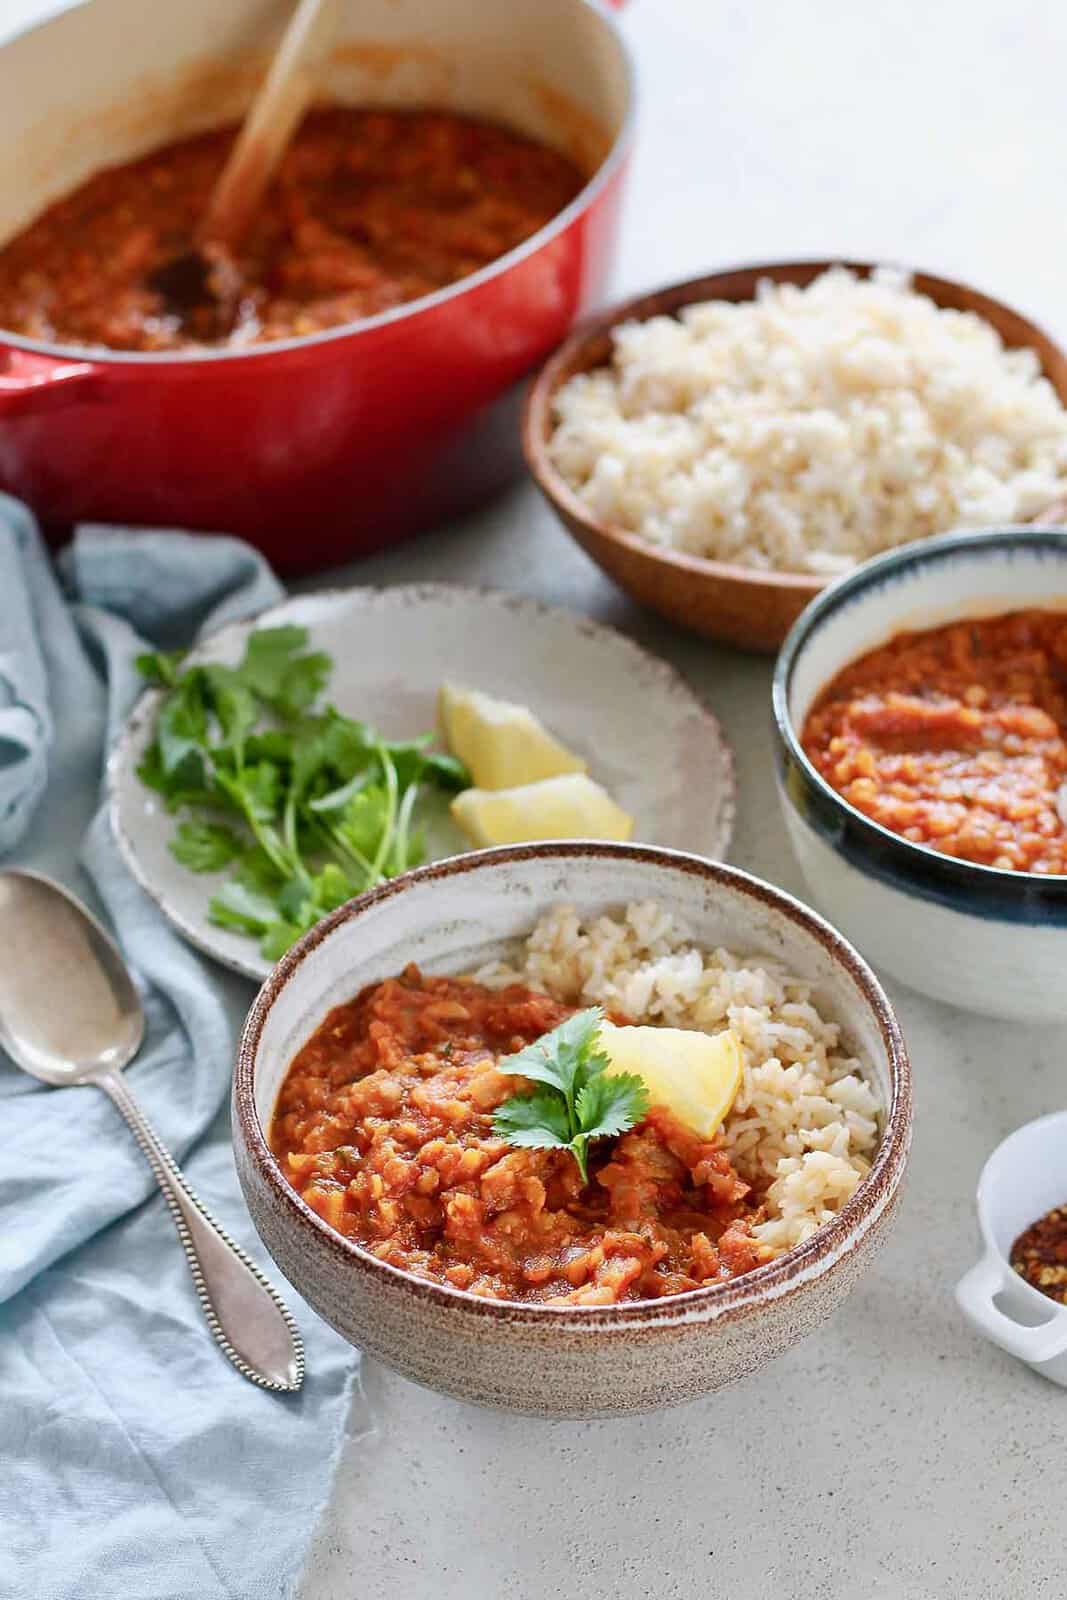 Red lentil stew in a bowl with rice surround by dishes filled with rice, stew, and garnishes.